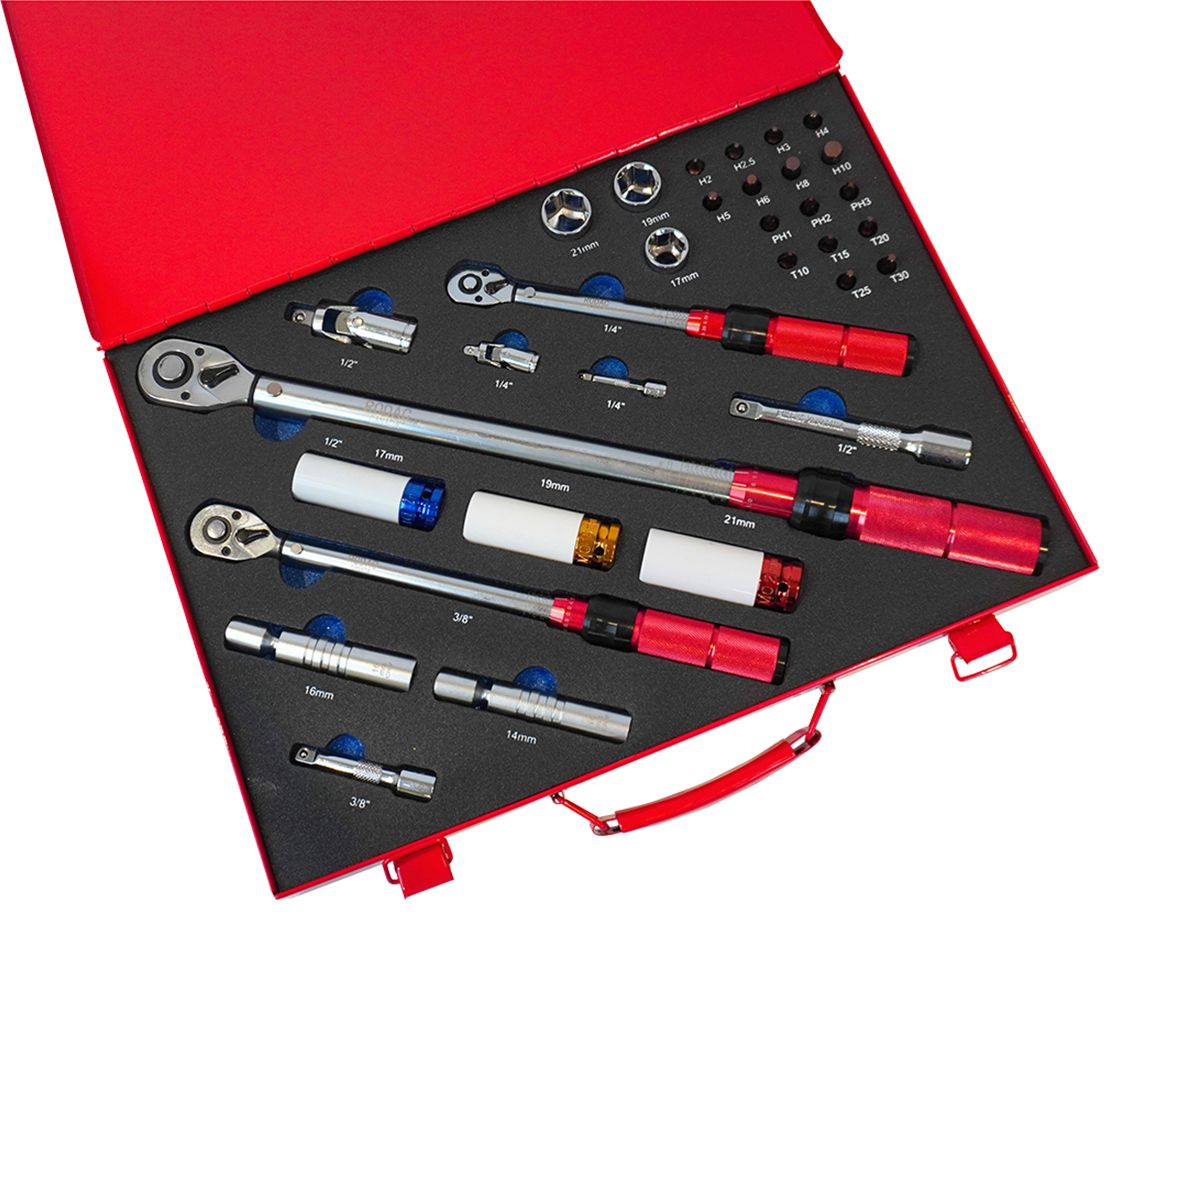 Torque Wrench Kit with 1/2", 3/8" and 1/4" Drives